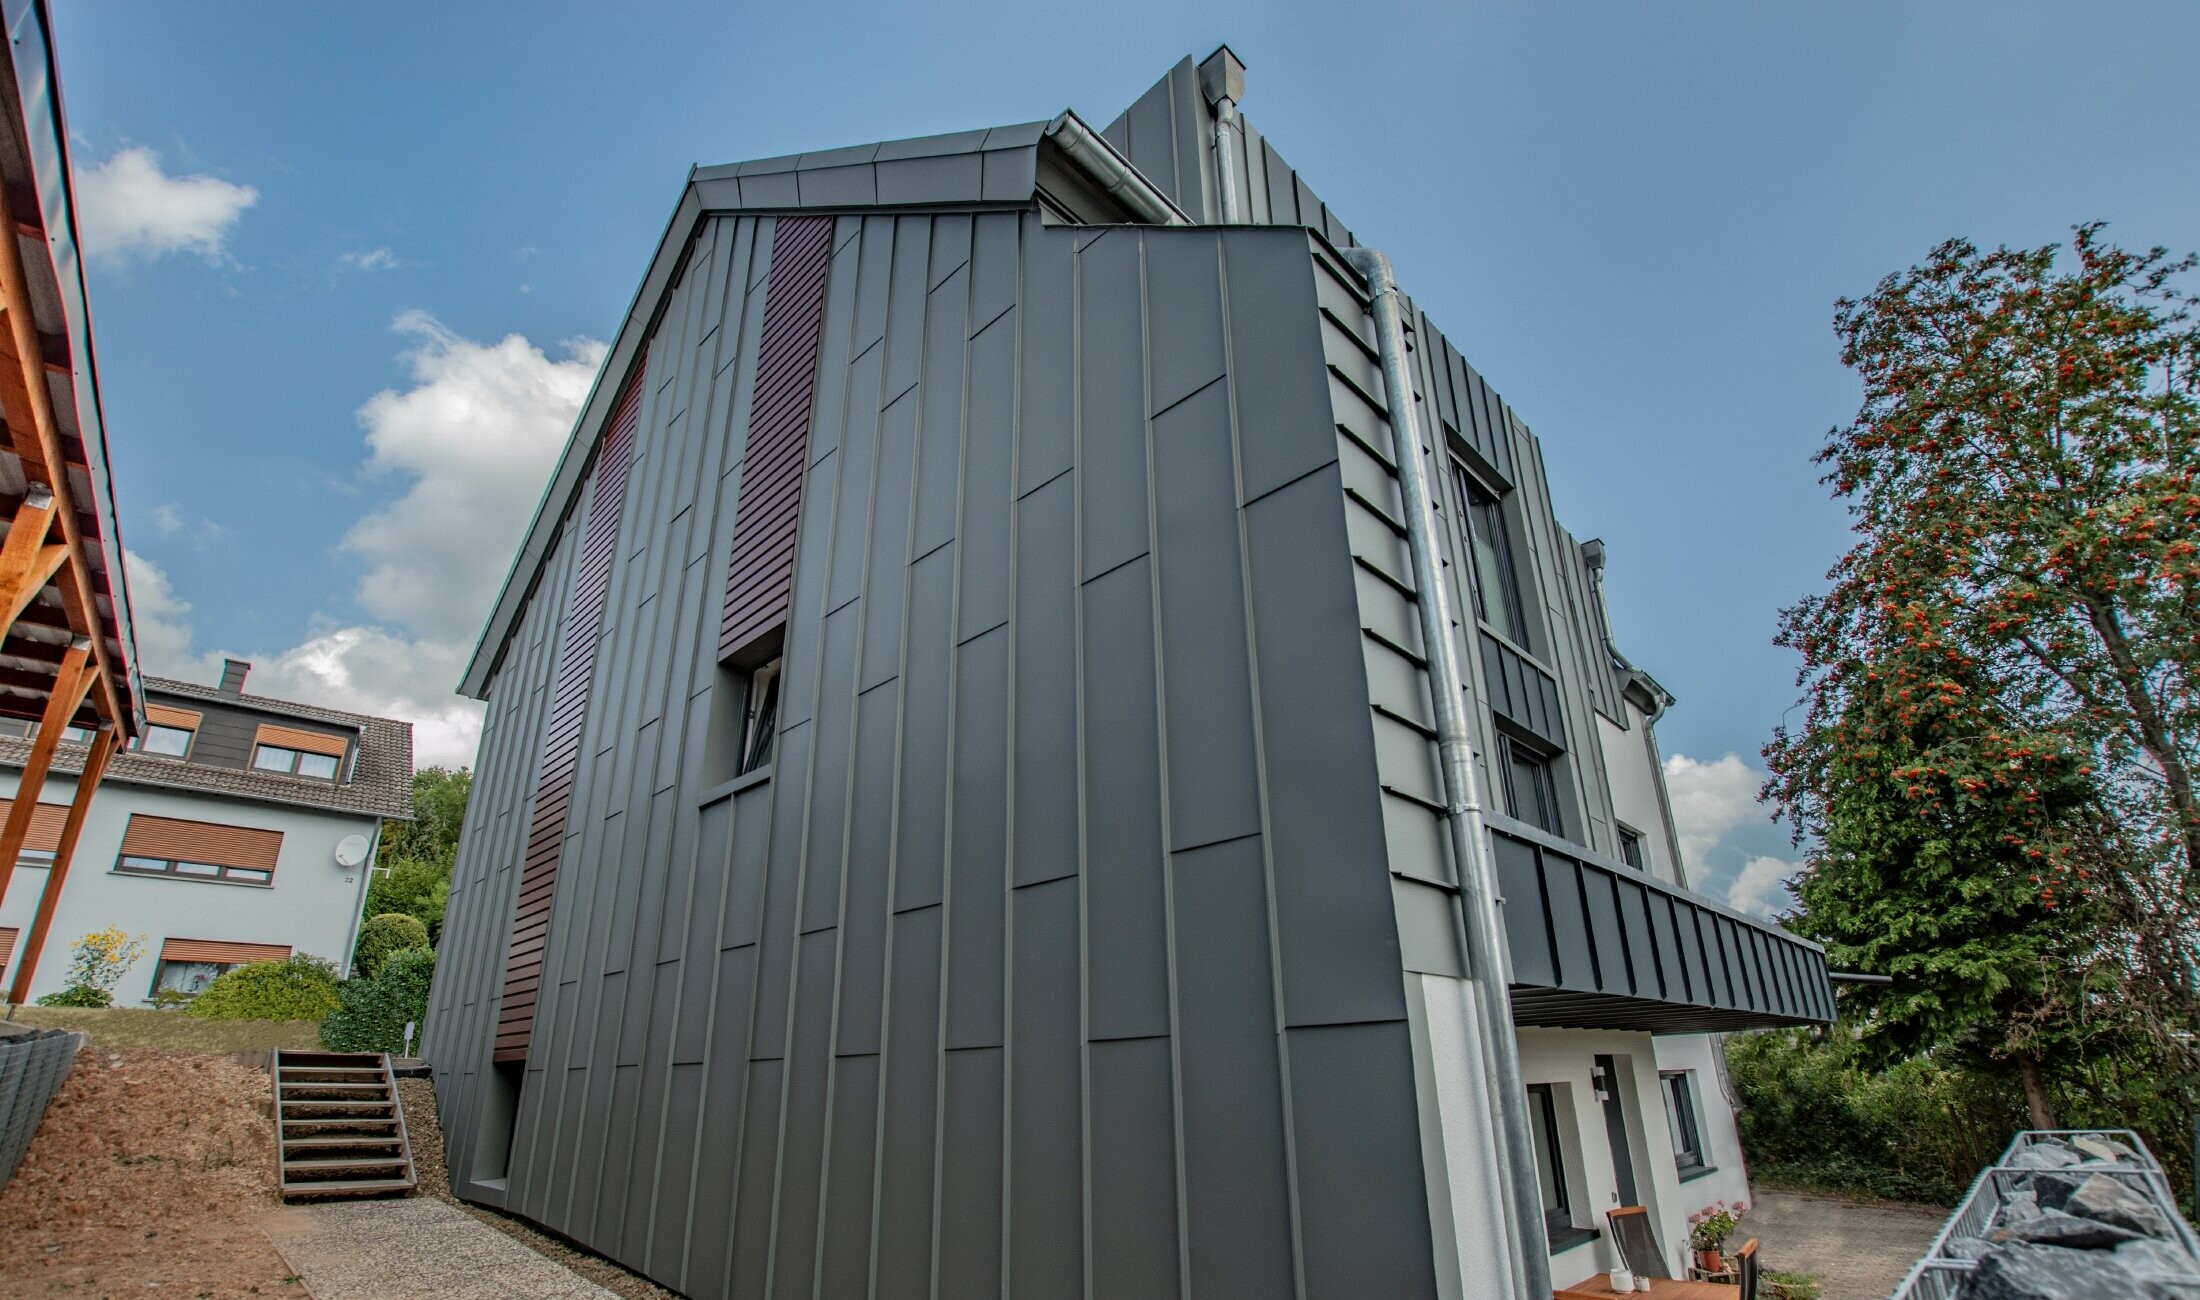 Façade design with vertical angular standing seam façade in light grey and horizontally installed façade panels in a dark wood finish. The entire façade was manufactured from PREFA aluminium.